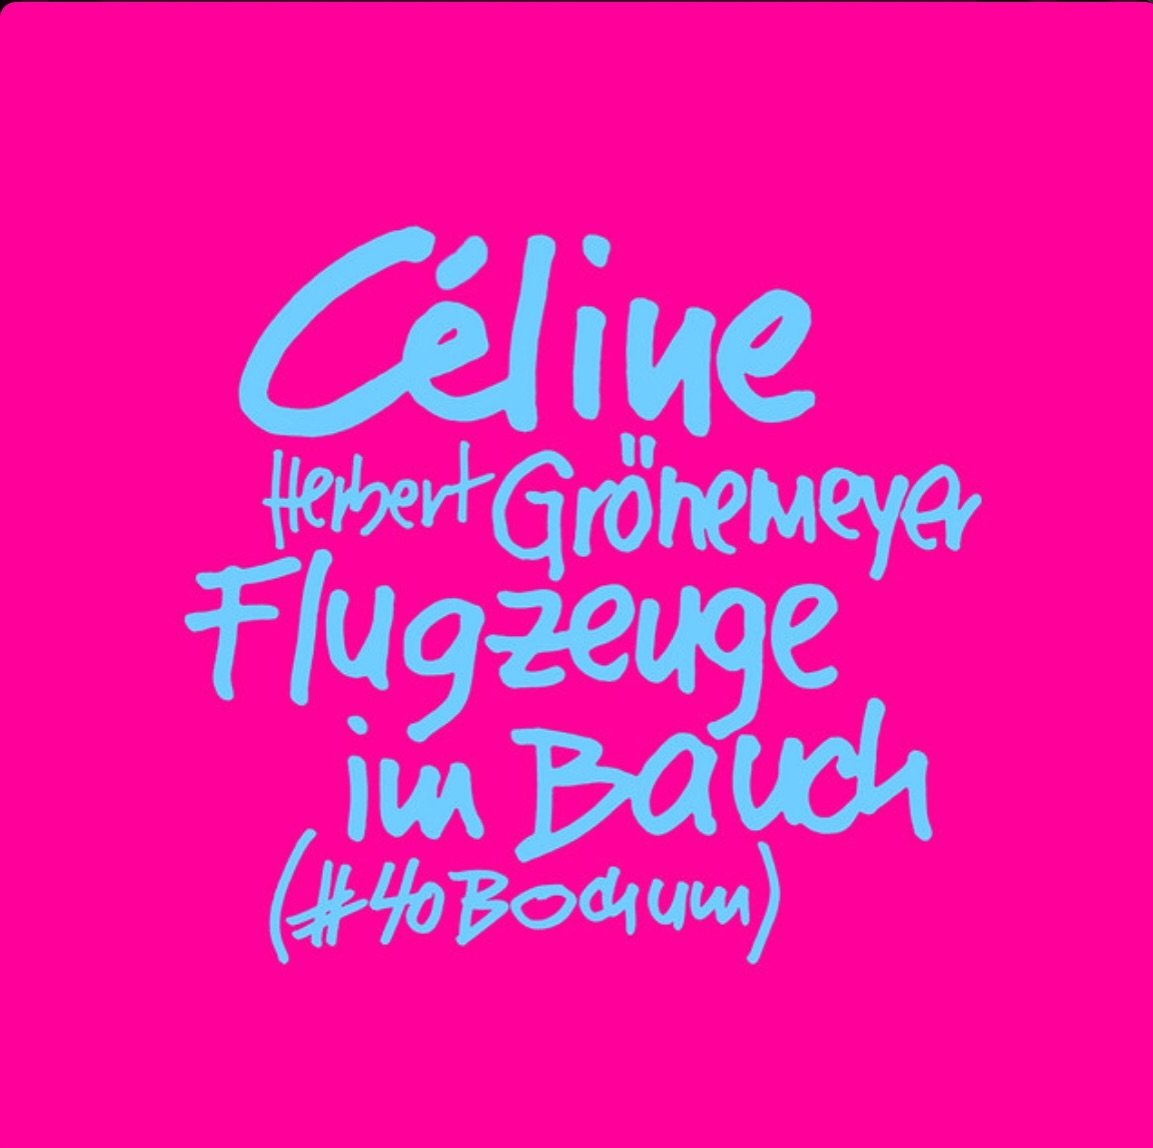 @celine.104 &amp; @herbertgroenemeyer 
✈️ &lsquo;Flugzeuge im Bauch&rsquo; - out now! ✈️
Co-written by @lazlomusik